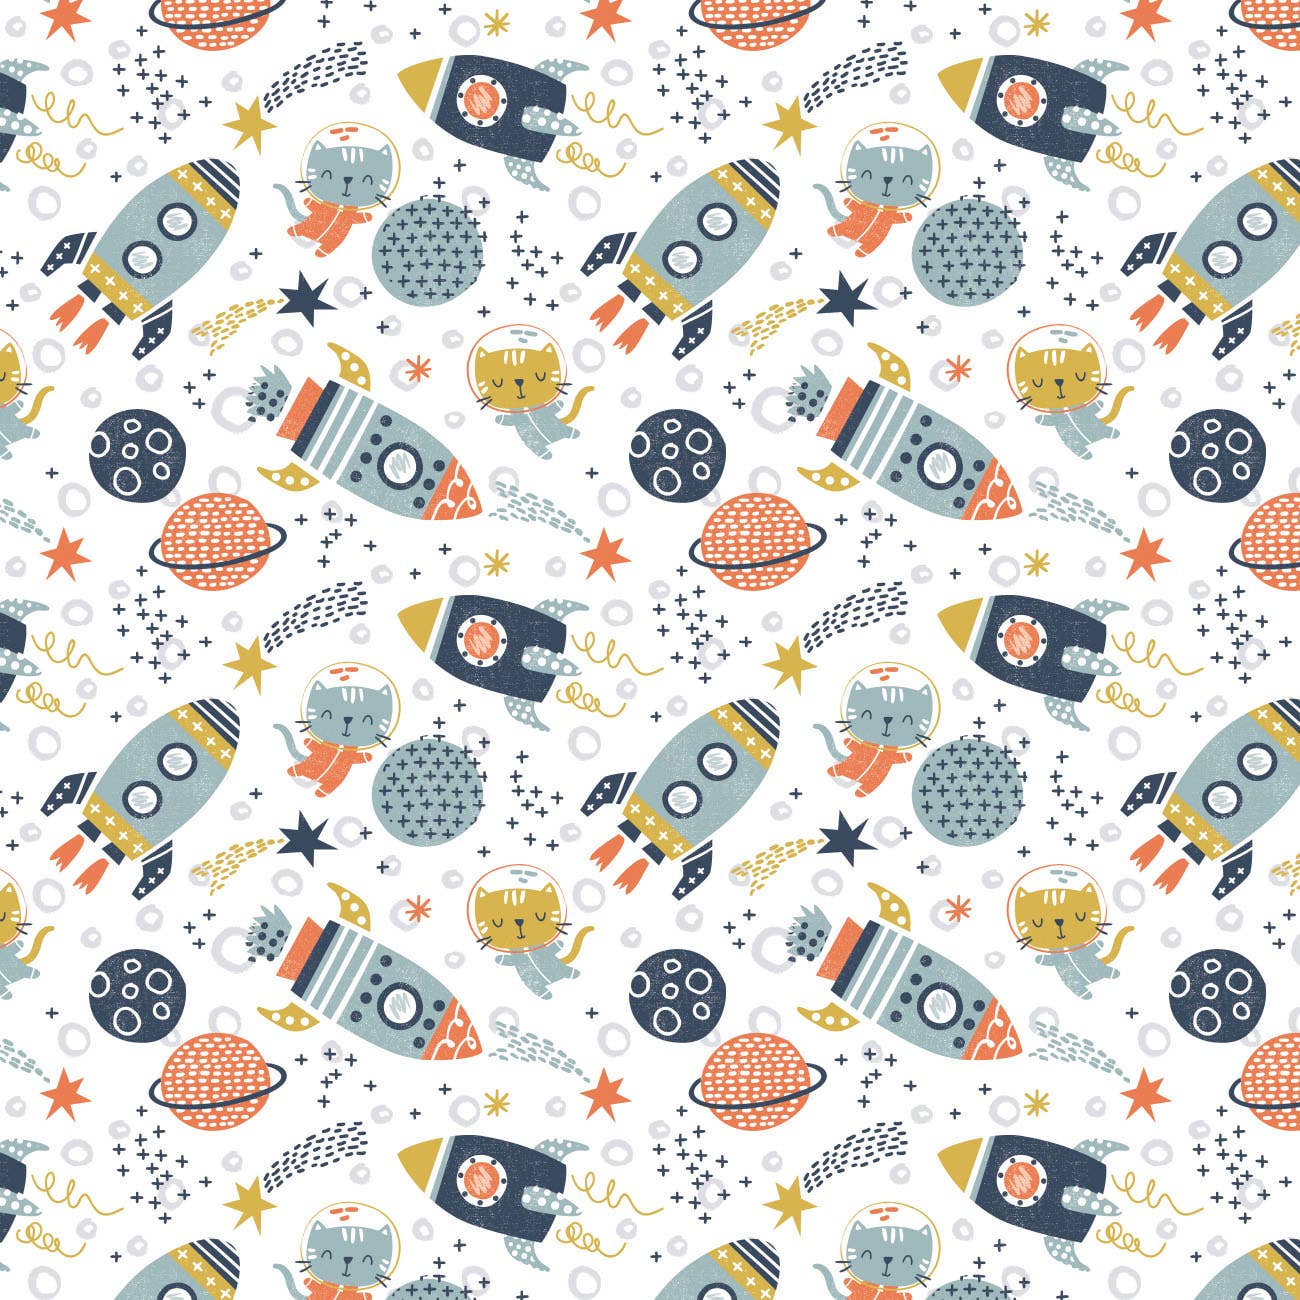 Space Kitten- 100% Cotton Printed Flannel-White by the yard